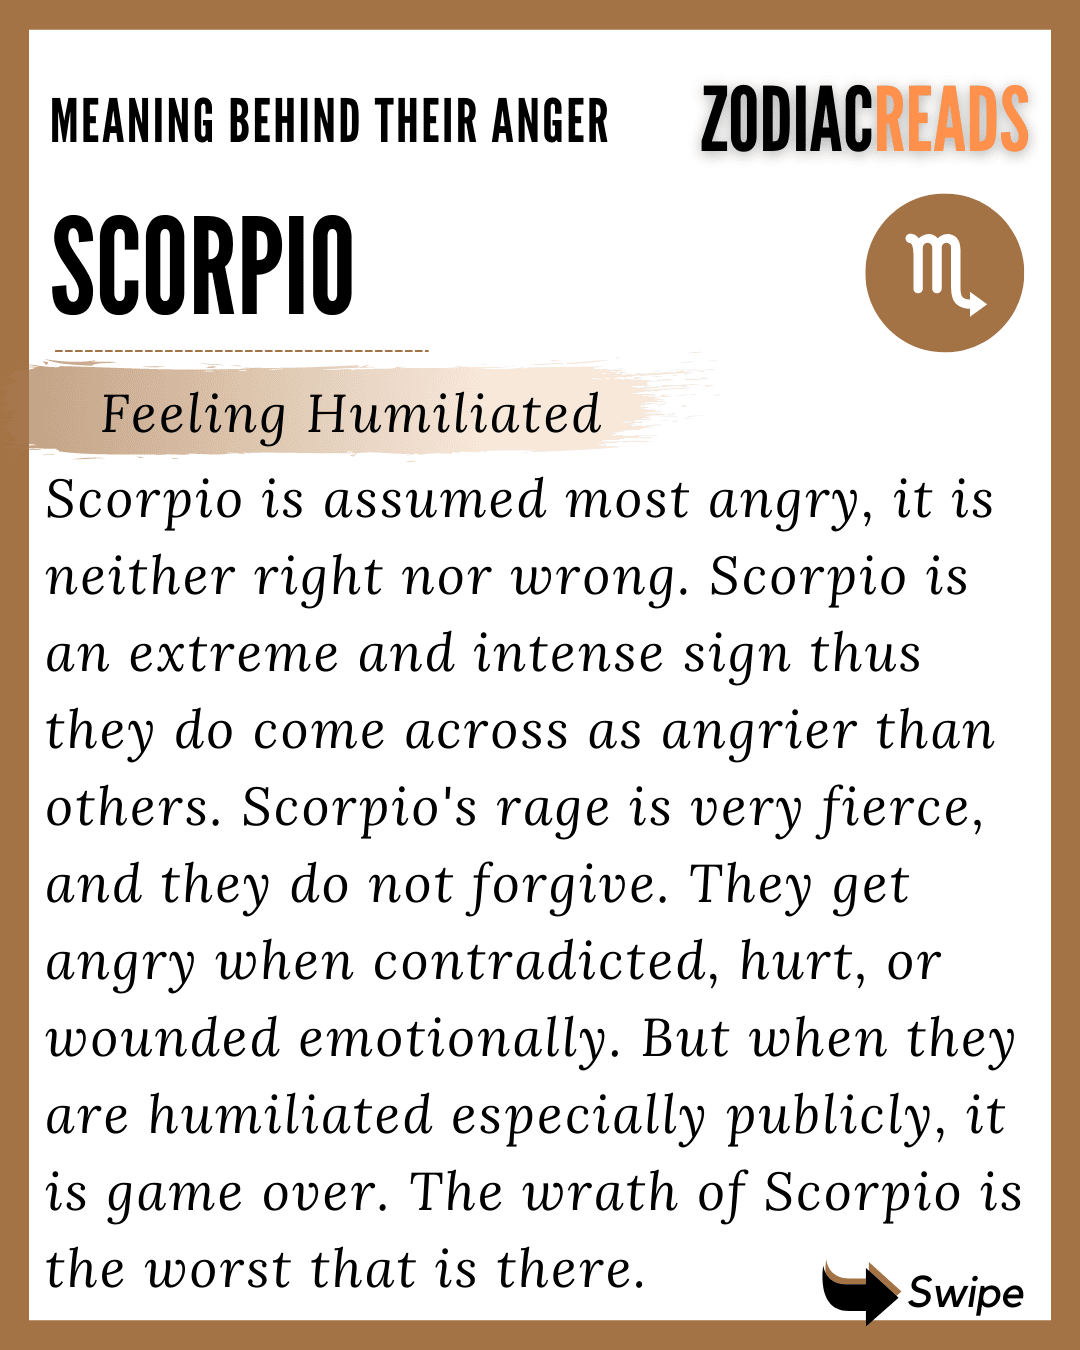 when scorpio is angry